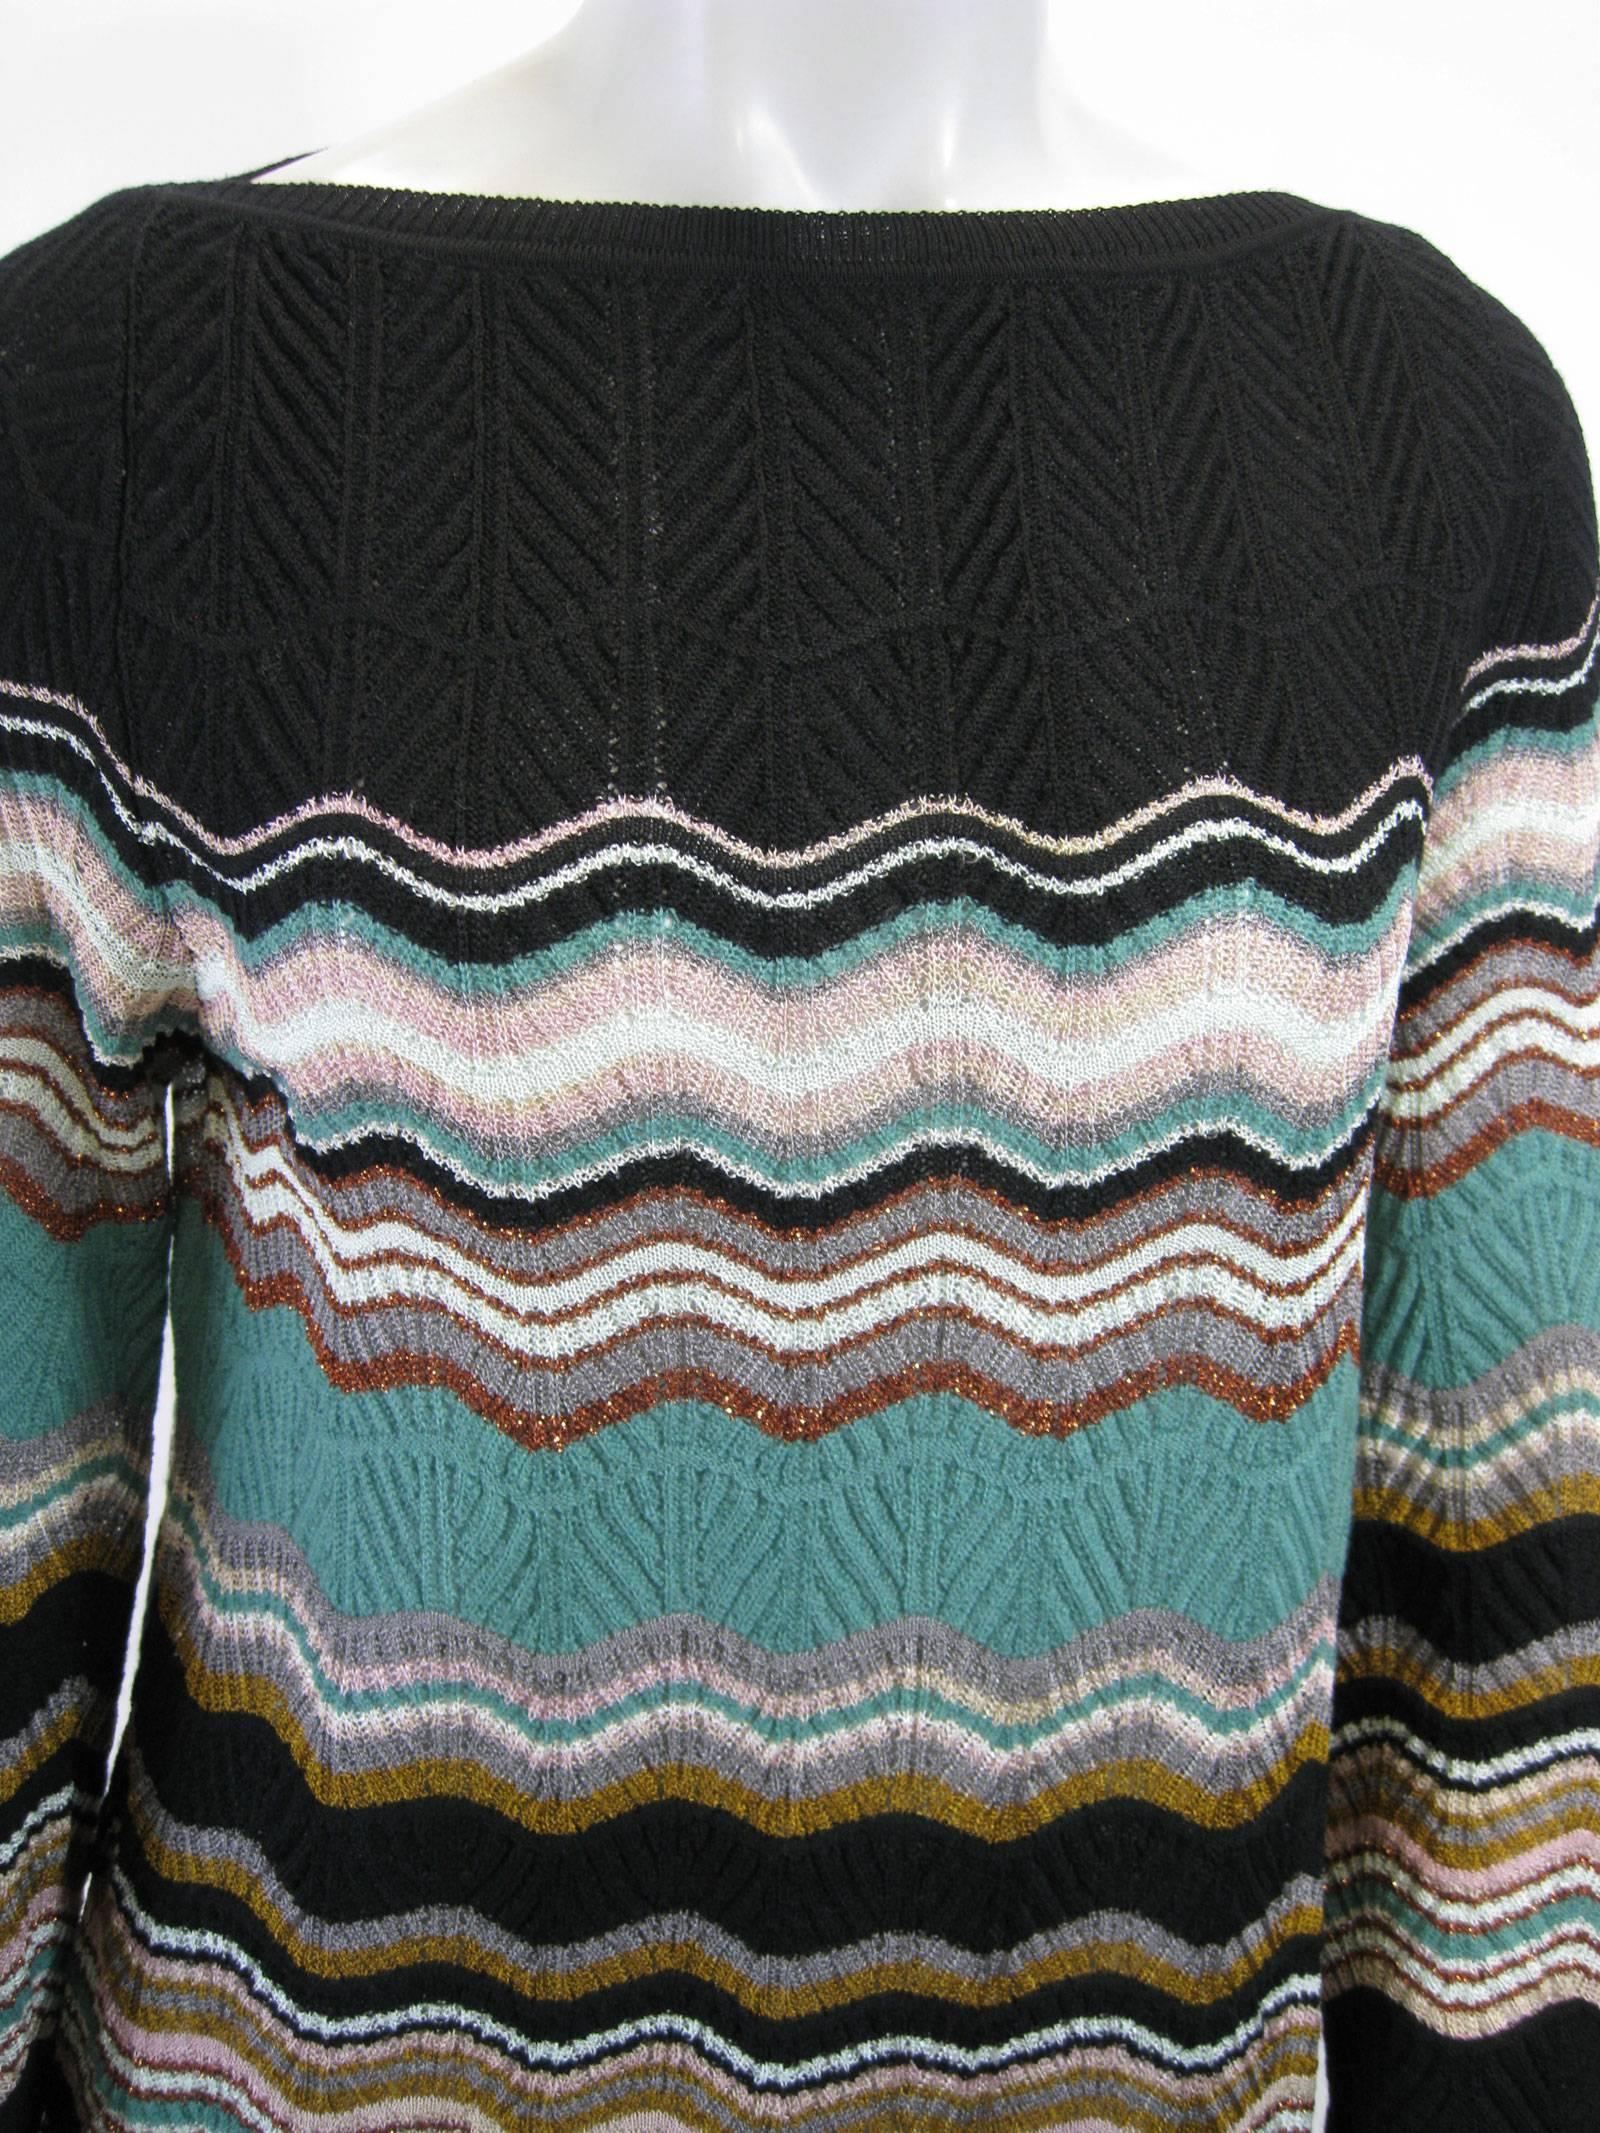 M Missoni quintessential chevron woven sweater.
Longer shape.
Boatneck.
Belled sleeves.
Lightweight, open weave.
Tagged an Italian 38/US 2.
